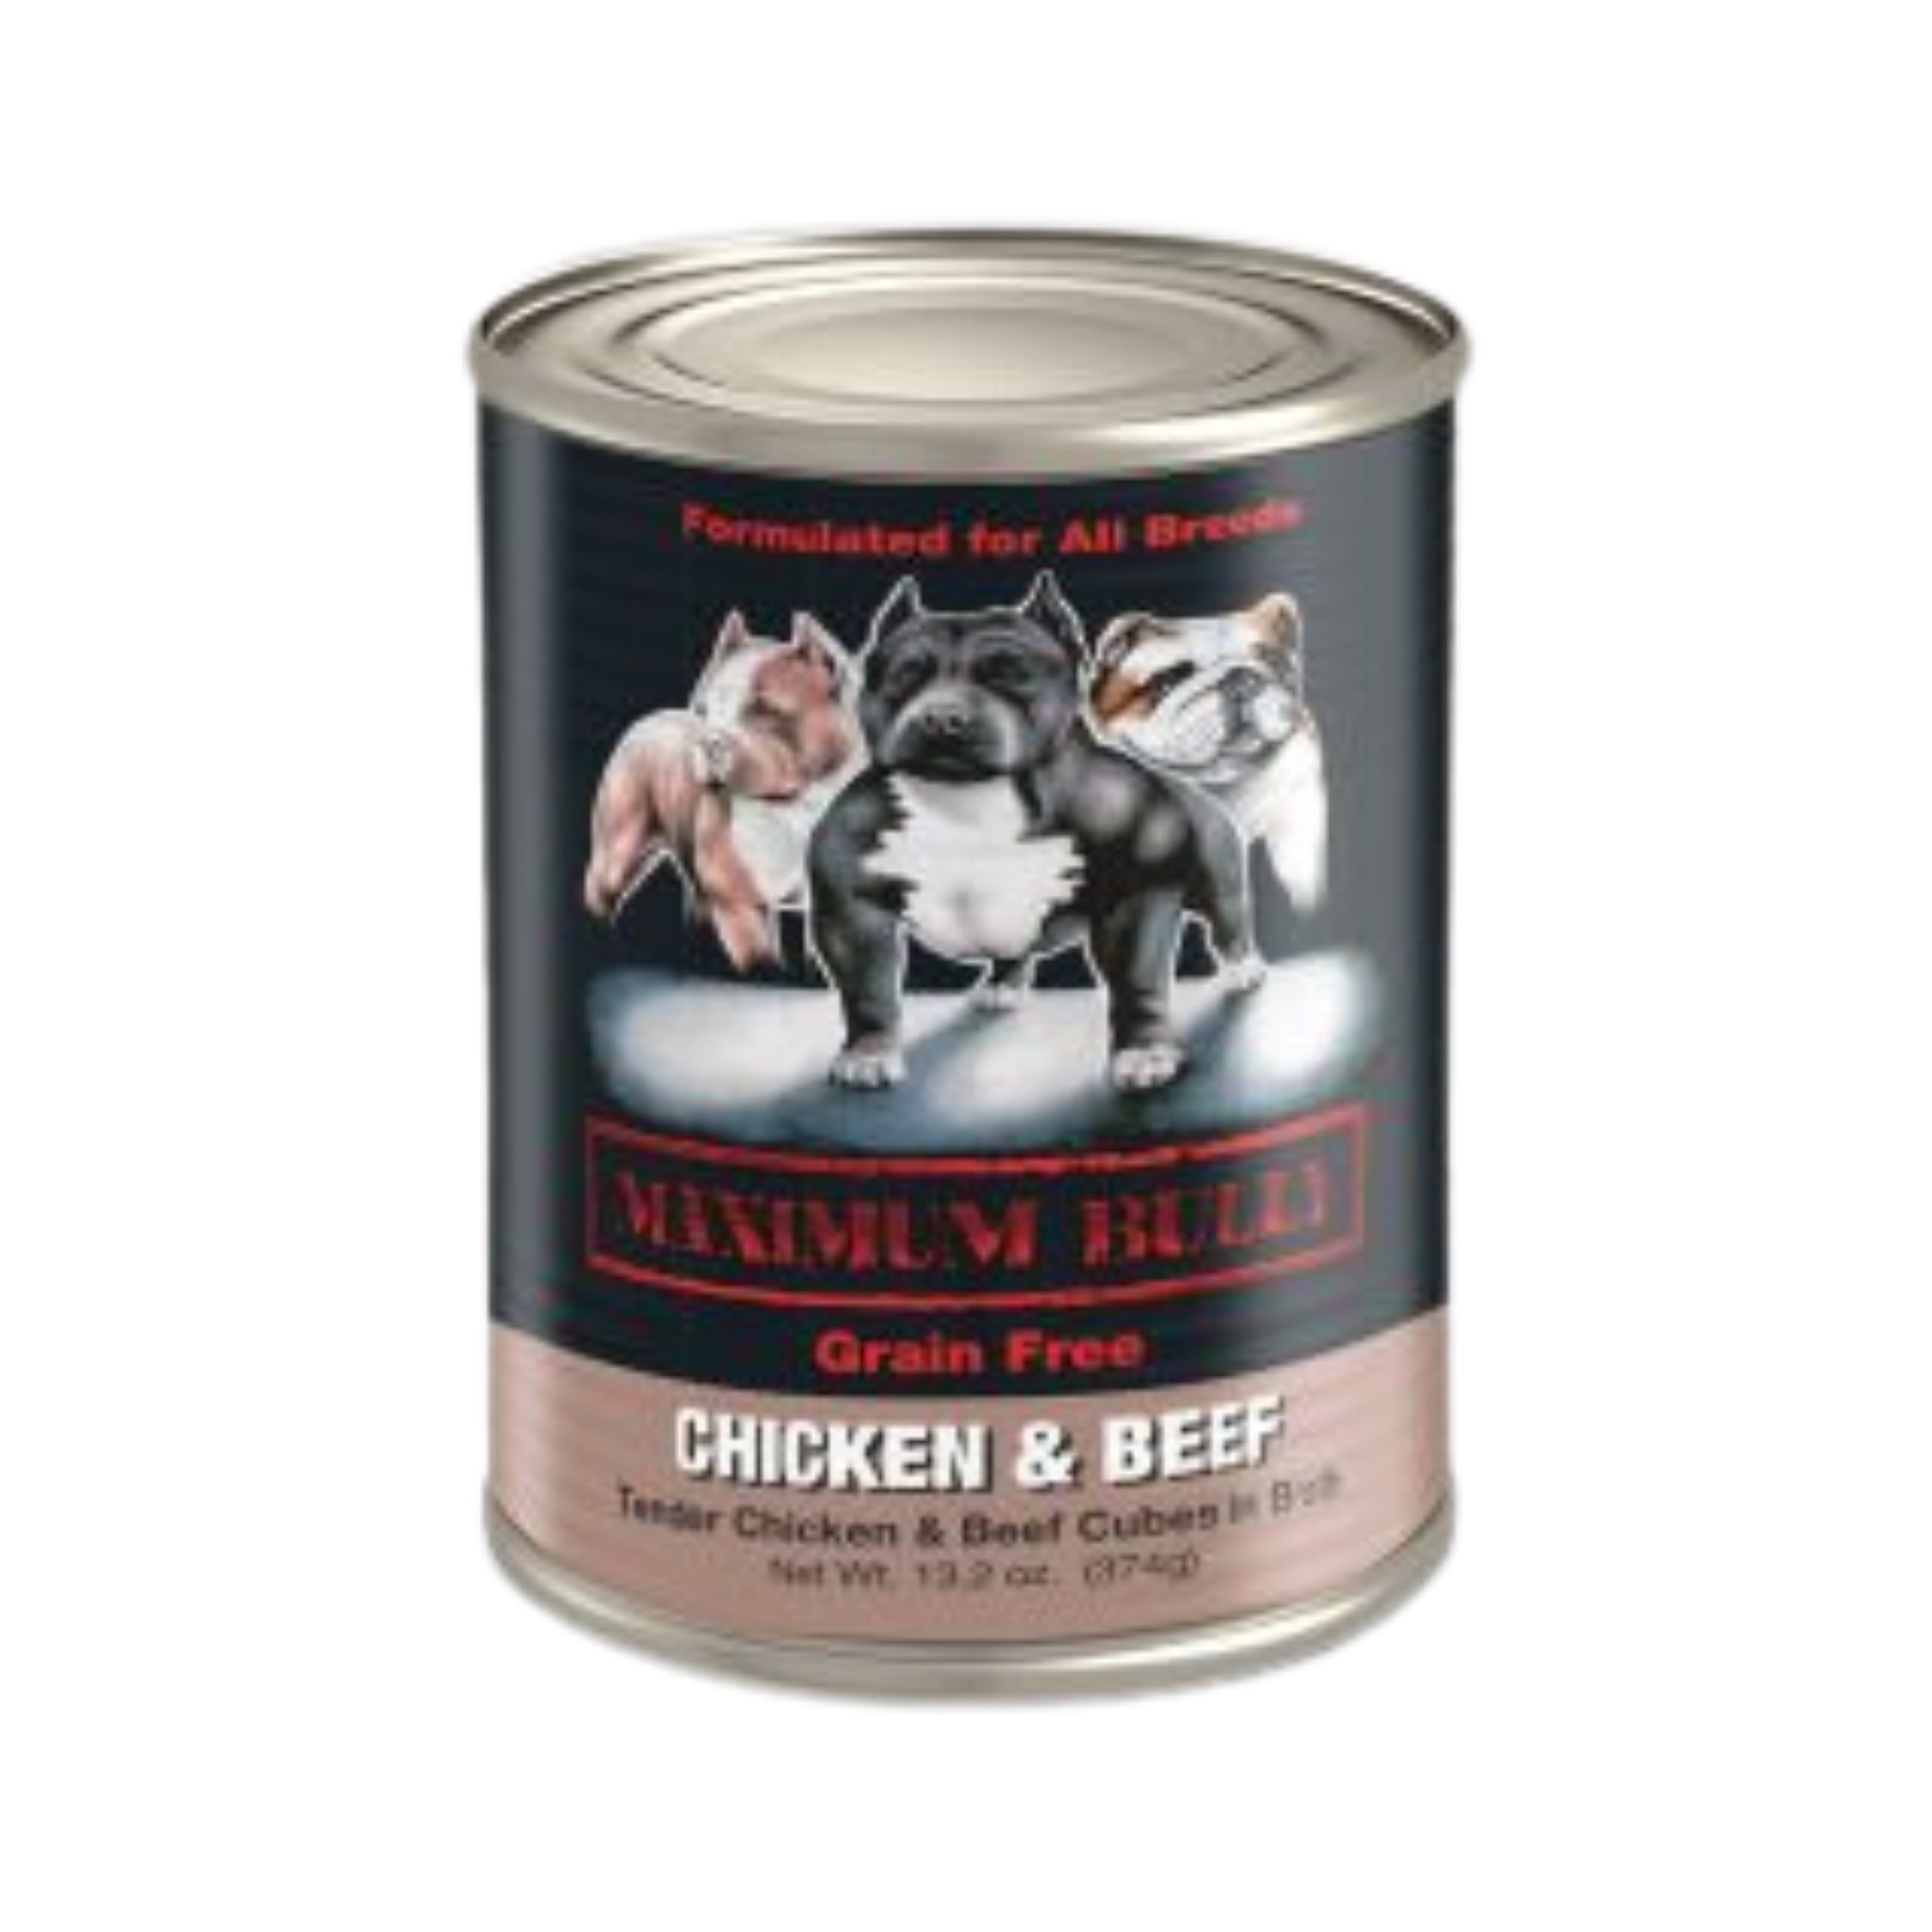 Maximum Bully Grain Free Chicken & Beef In Broth Dog Canned